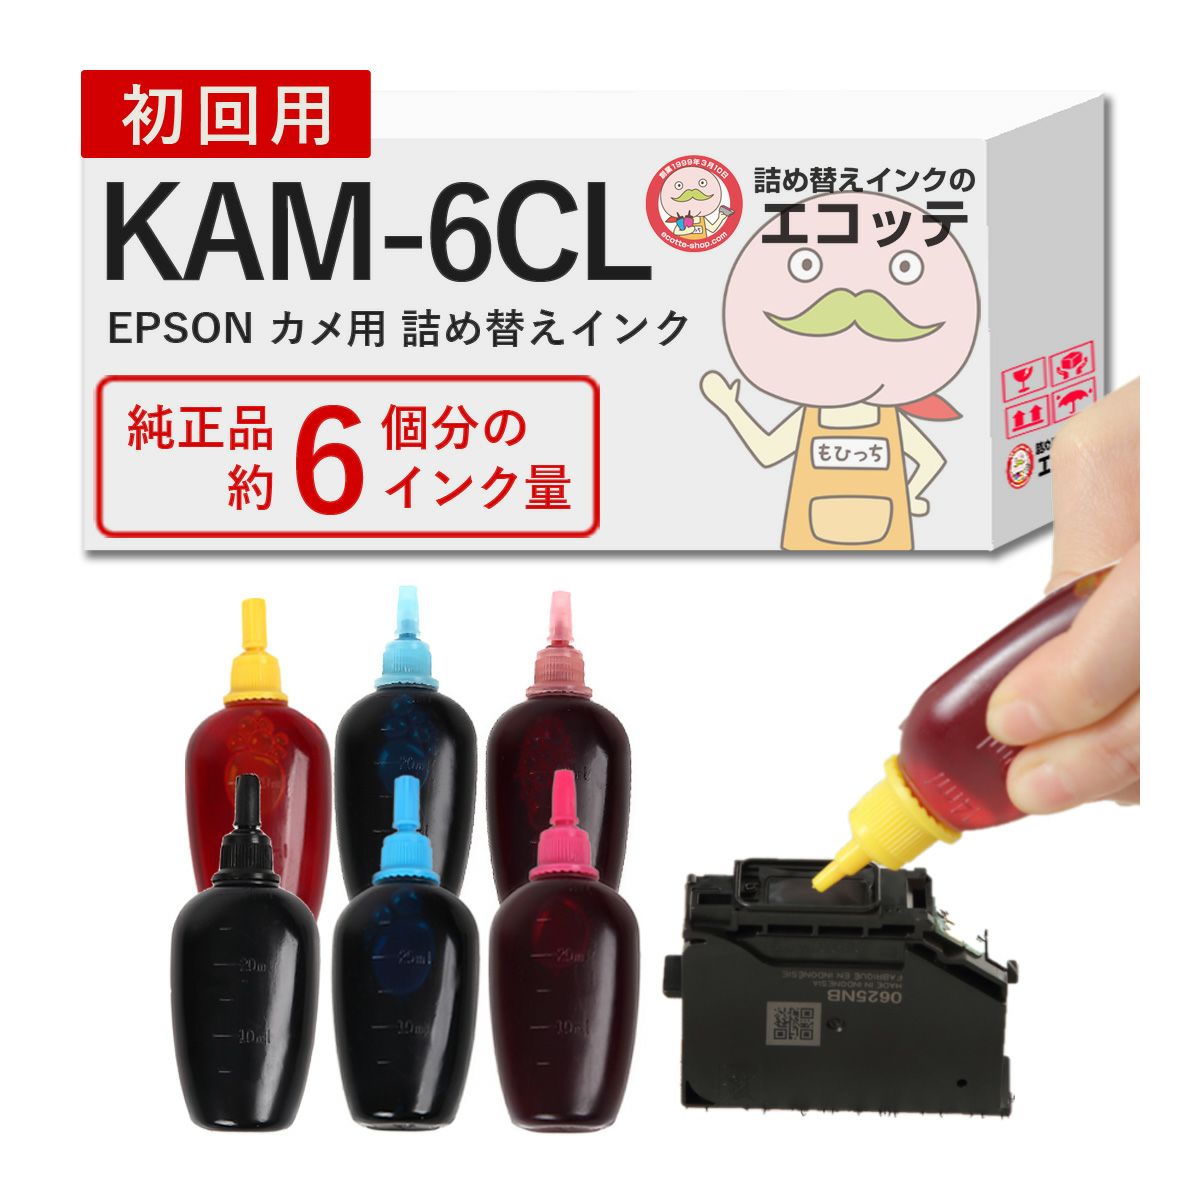 KAM-6CL/KAM カメ EPSON(エプソン) 純正用詰め替えインク